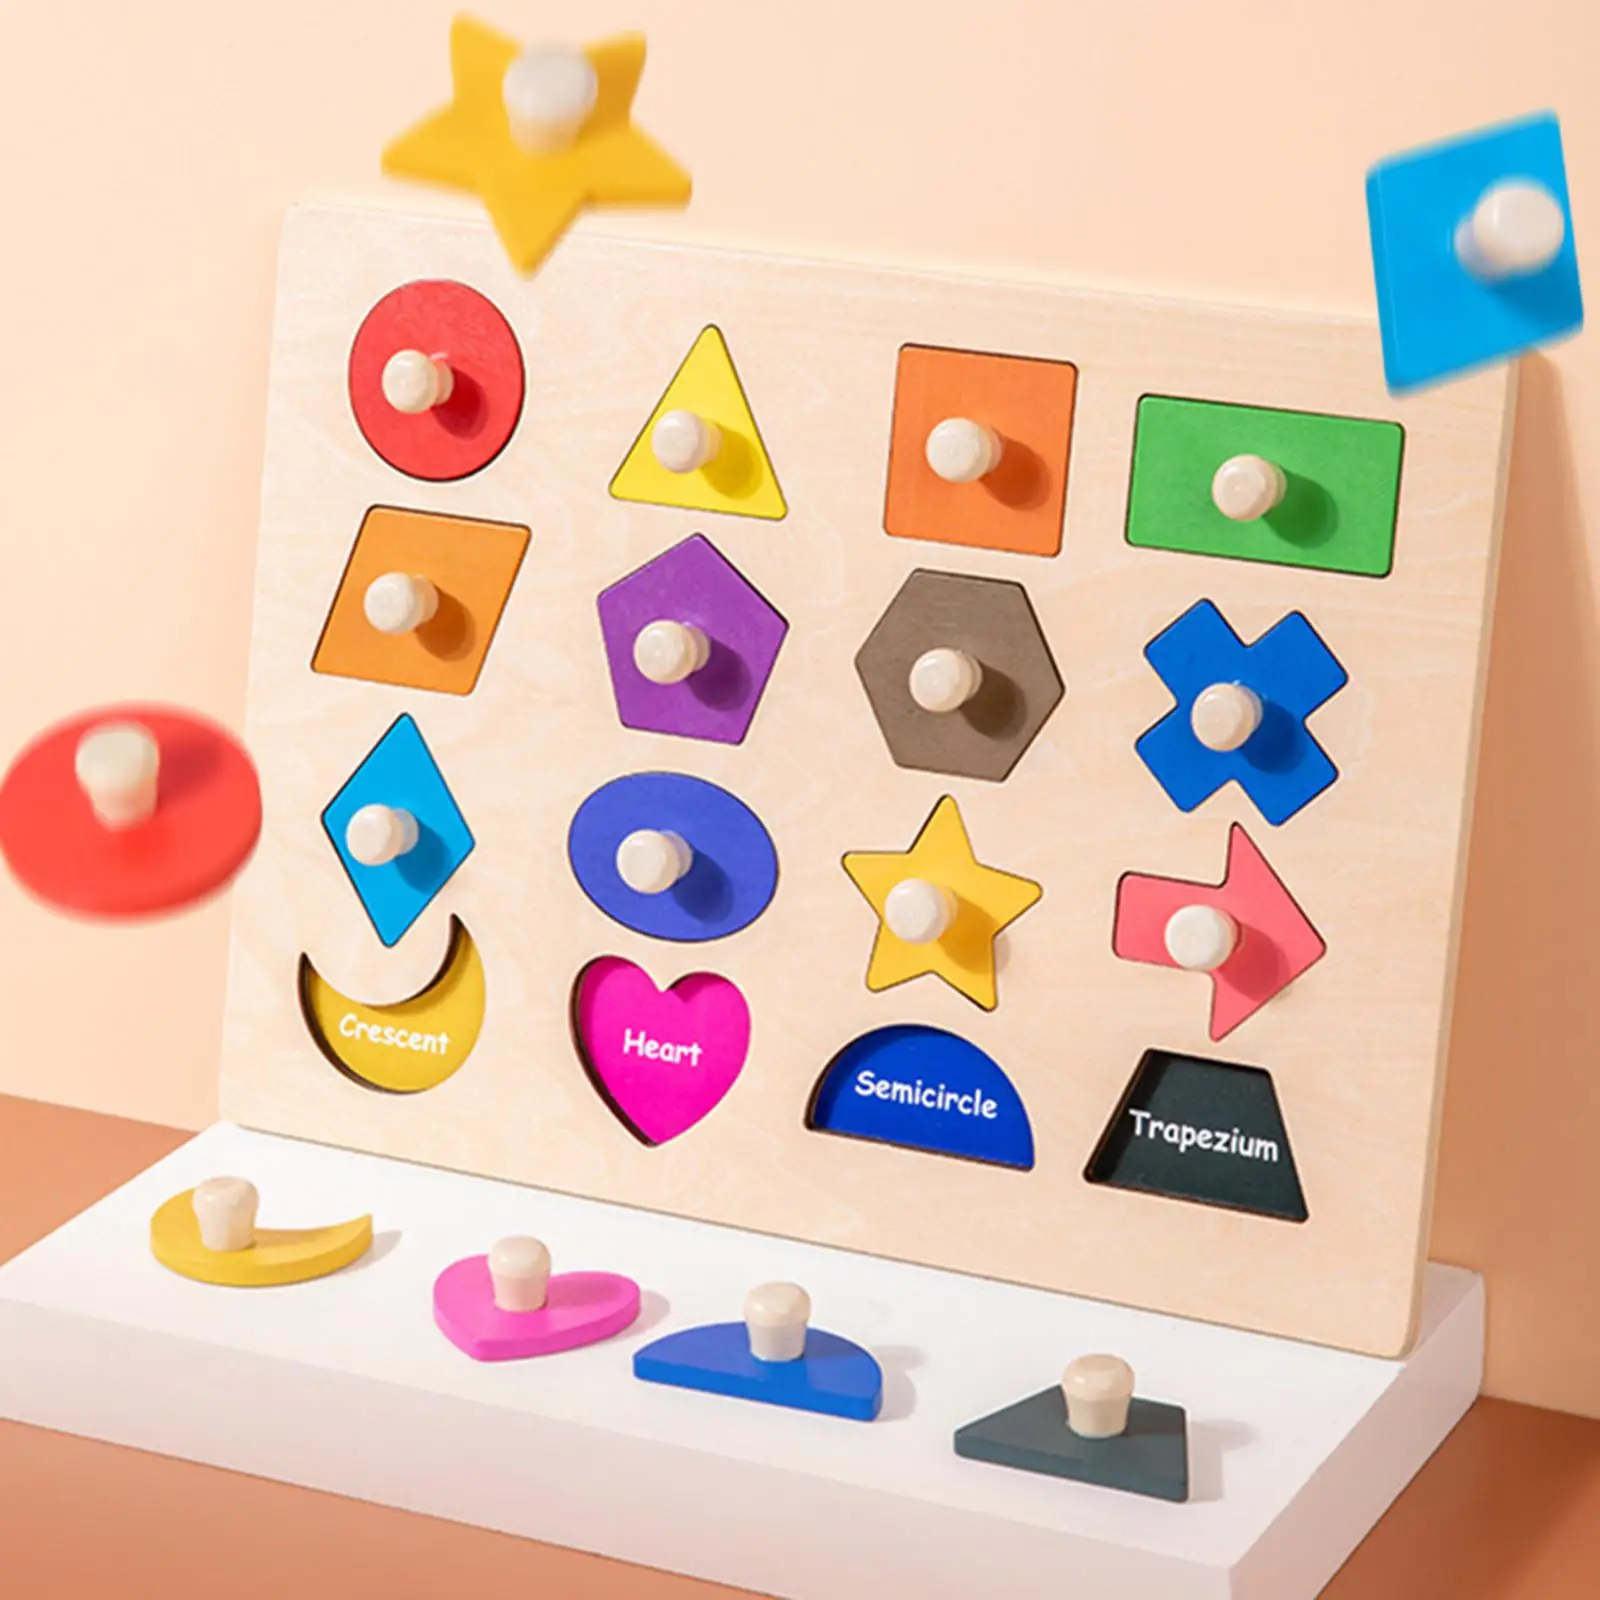 Wooden Sorting Stacking Blocks Shape Color Recognition Geometric Stacker Game Learning Shape Matching puzzles for Preschool